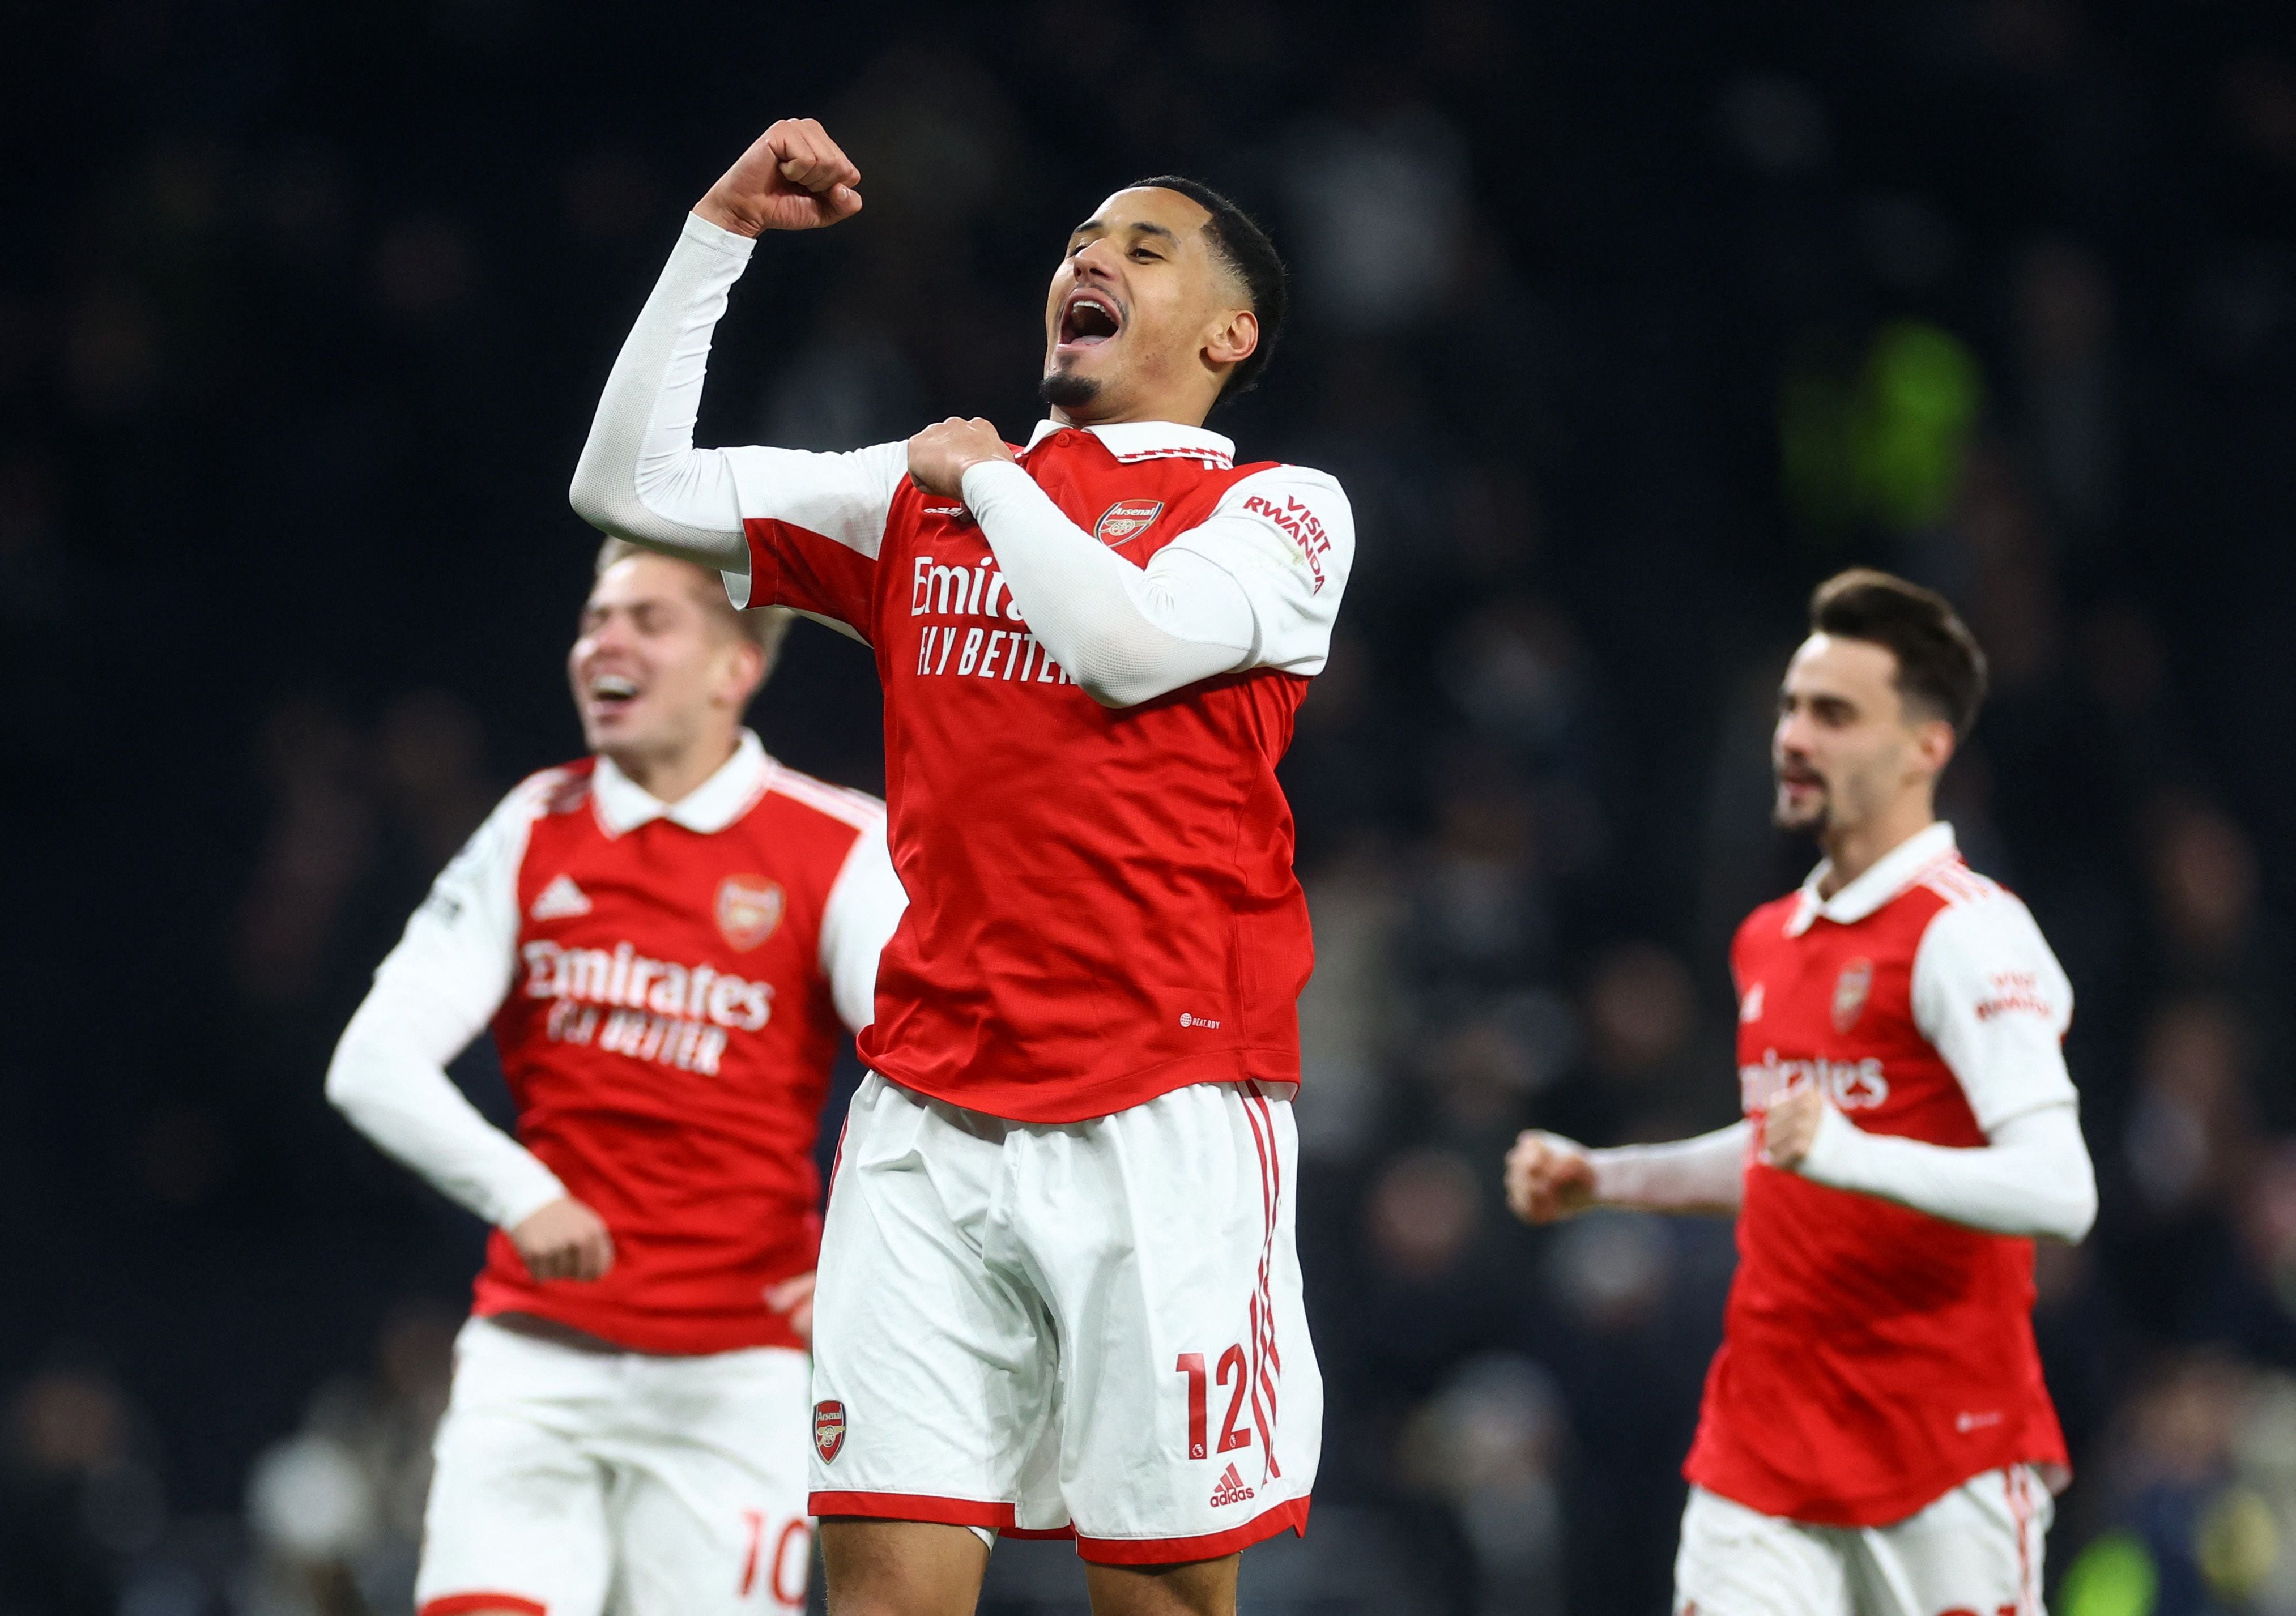 Soccer Football - Premier League - Tottenham Hotspur v Arsenal - Tottenham Hotspur Stadium, London, Britain - January 15, 2023 Arsenal's William Saliba celebrates after the match Action Images via Reuters/Paul Childs EDITORIAL USE ONLY. No use with unauthorized audio, video, data, fixture lists, club/league logos or 'live' services. Online in-match use limited to 75 images, no video emulation. No use in betting, games or single club /league/player publications.  Please contact your account representative for further details.